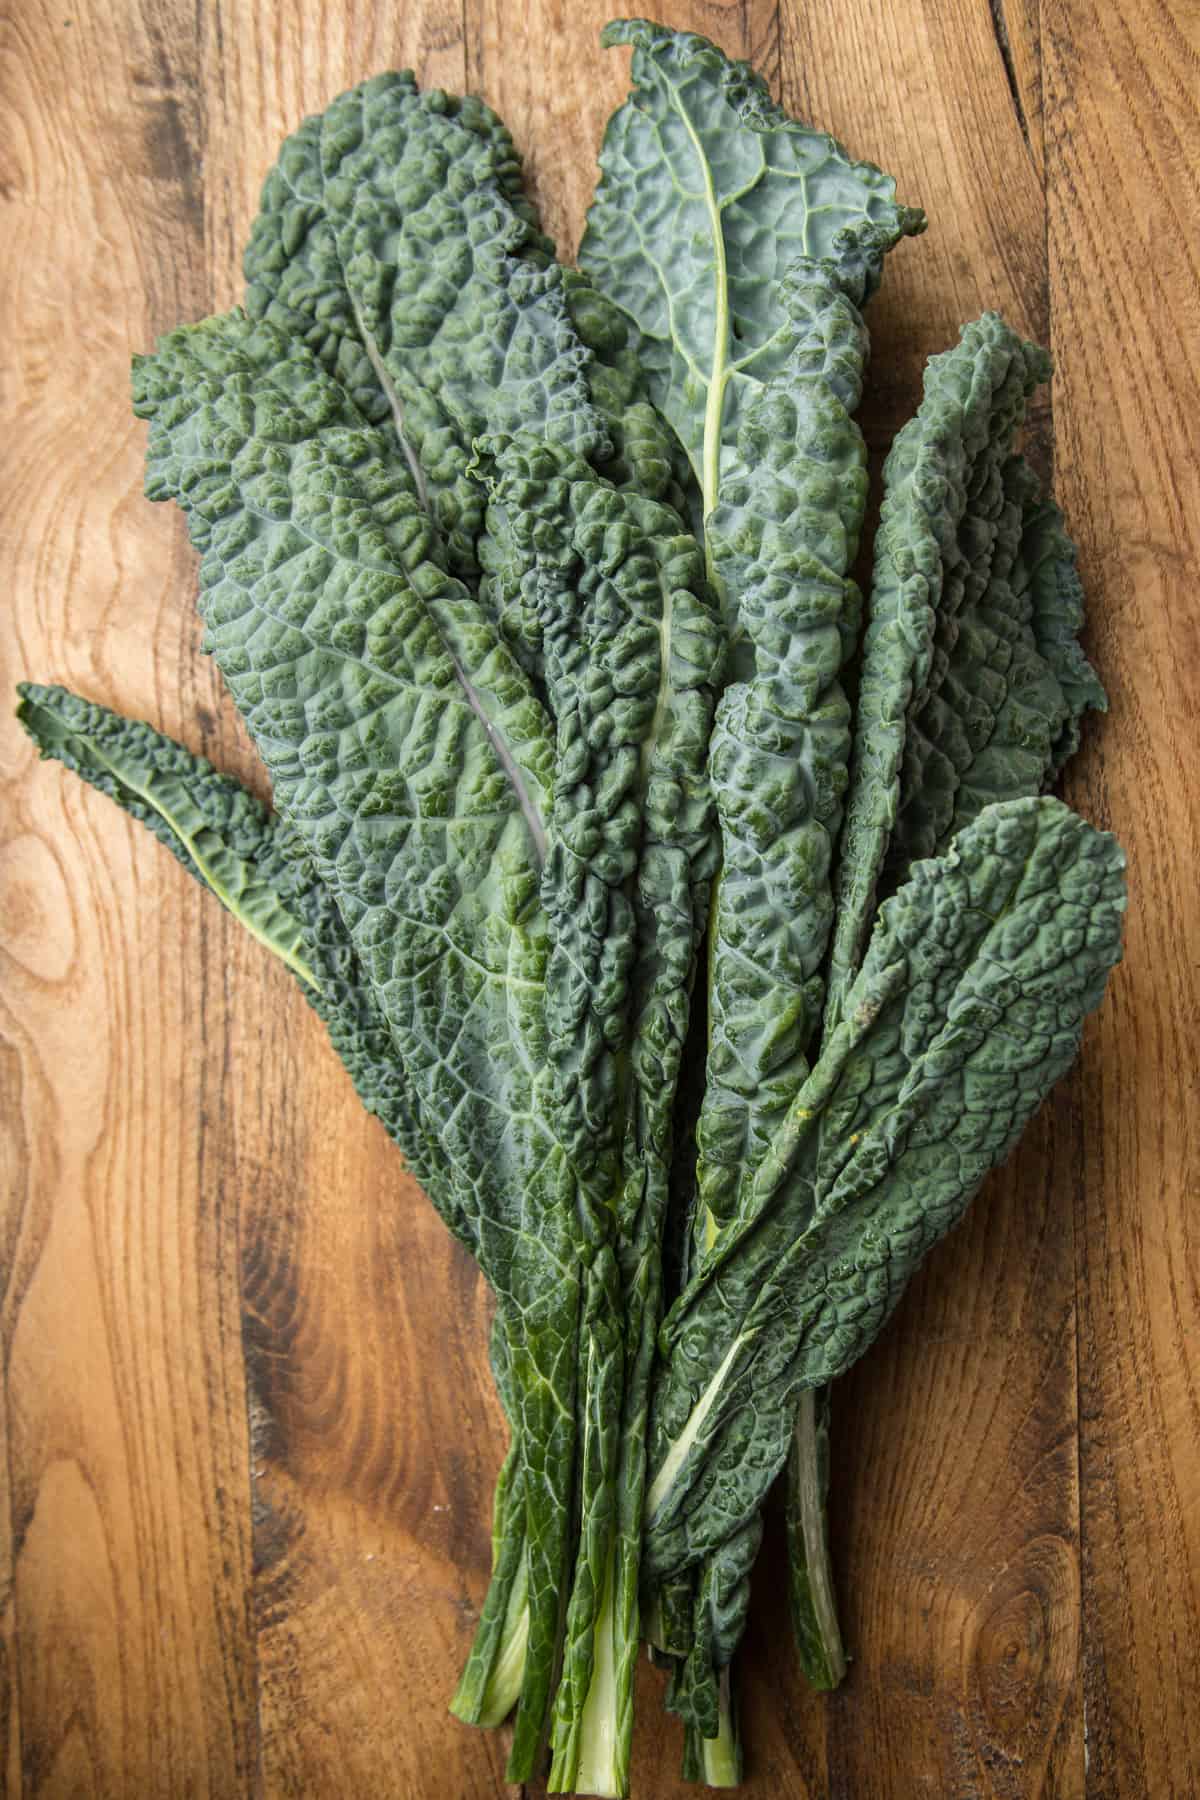 Bunch of Lacinato Kale on a Wood Surface